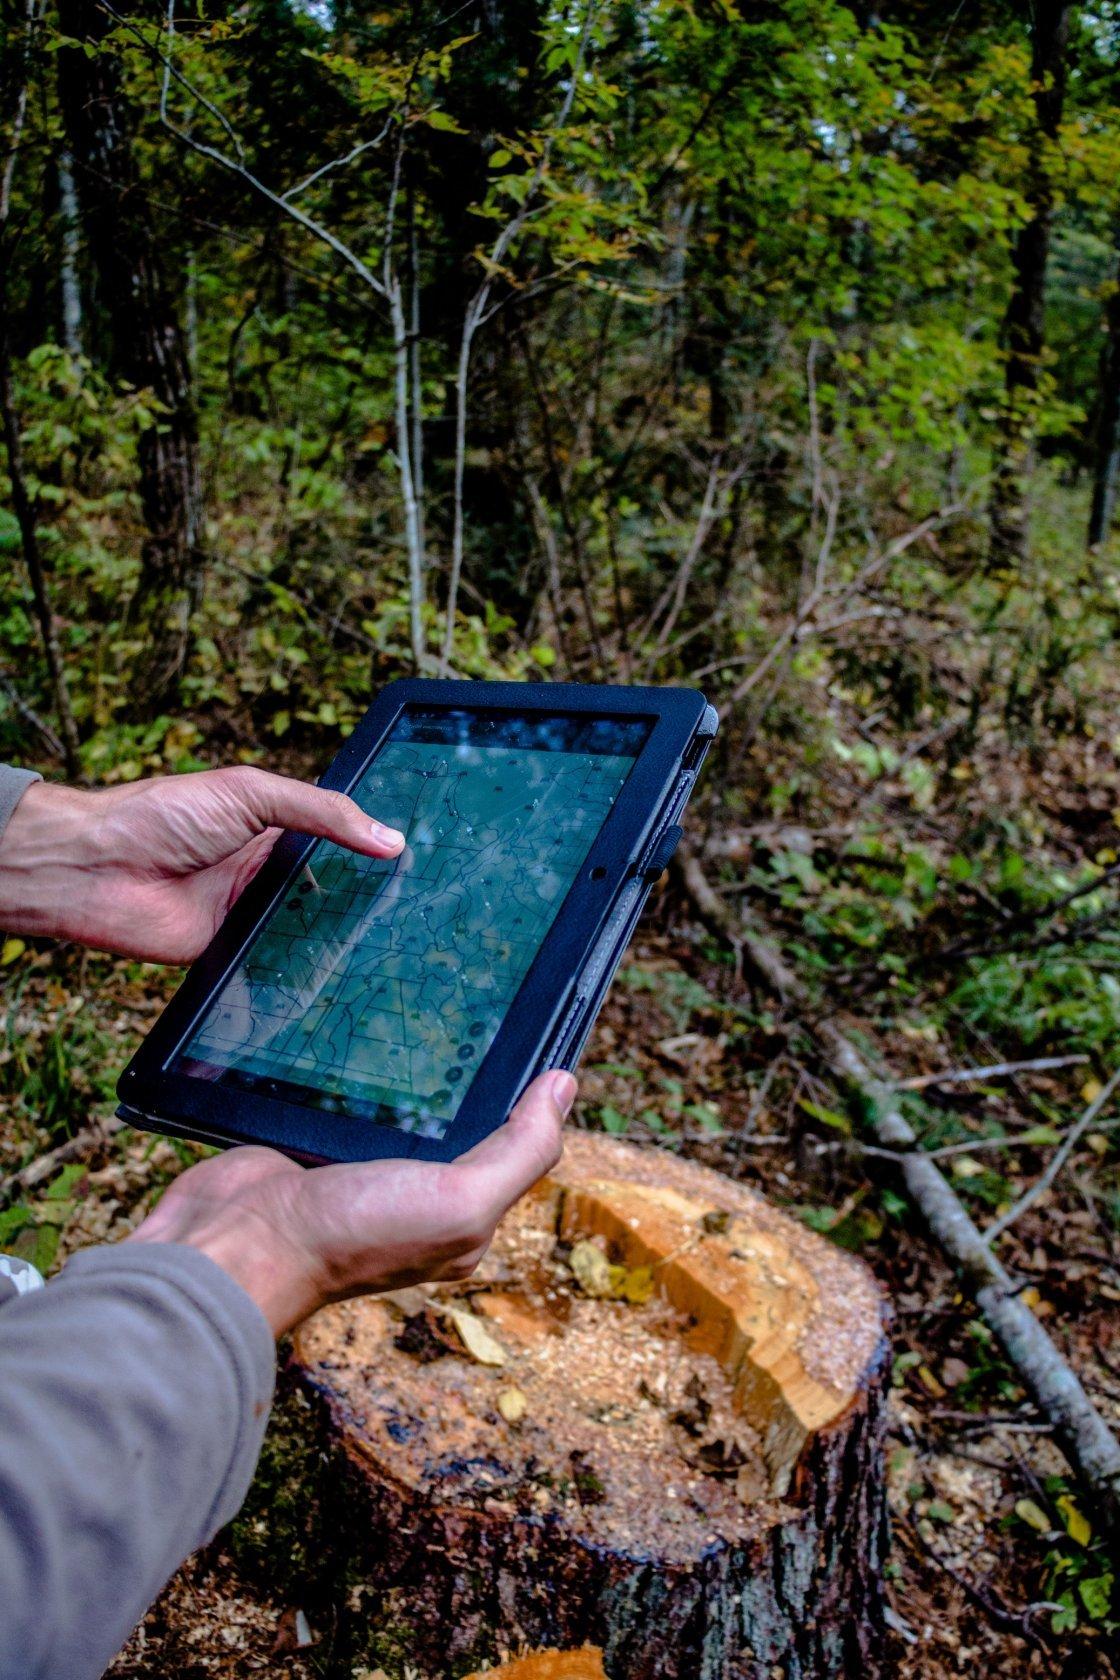 man at felled tree in forest holding web-linked monitoring tablet